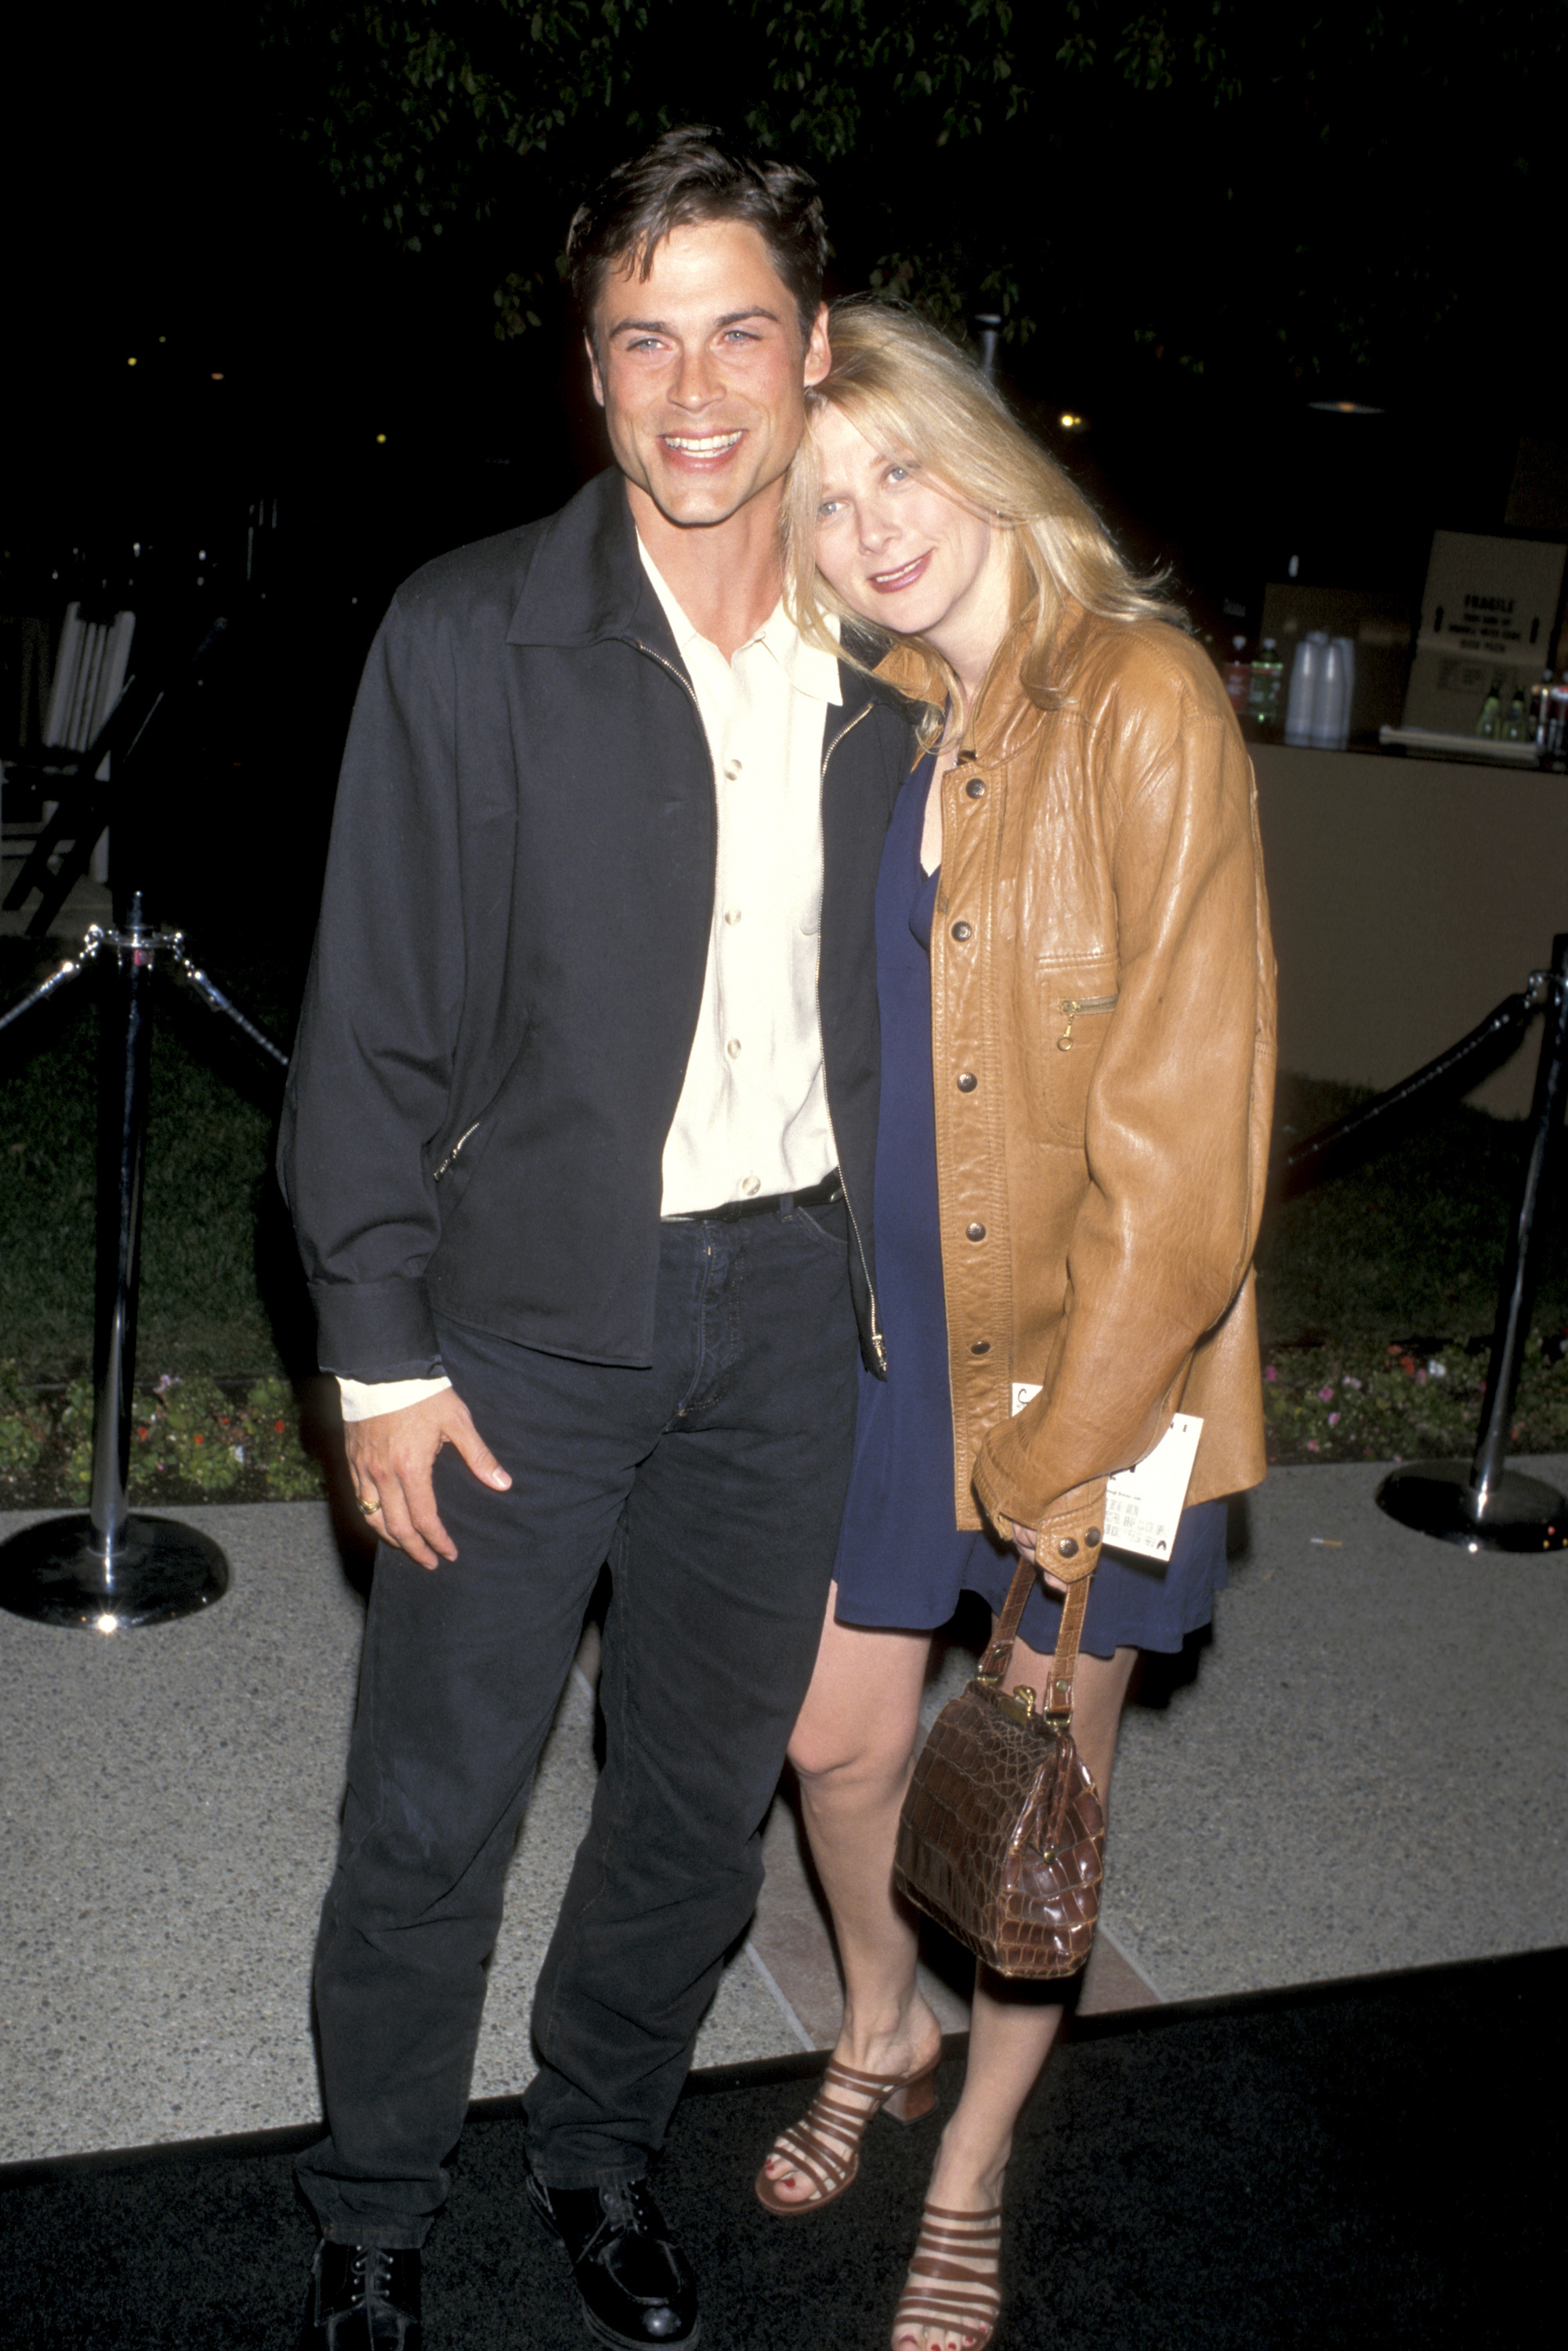 Sheryl Berkoff and Rob Lowe at the "Tommy Boy" Los Angeles Premiere in 1995 | Source: Getty Images